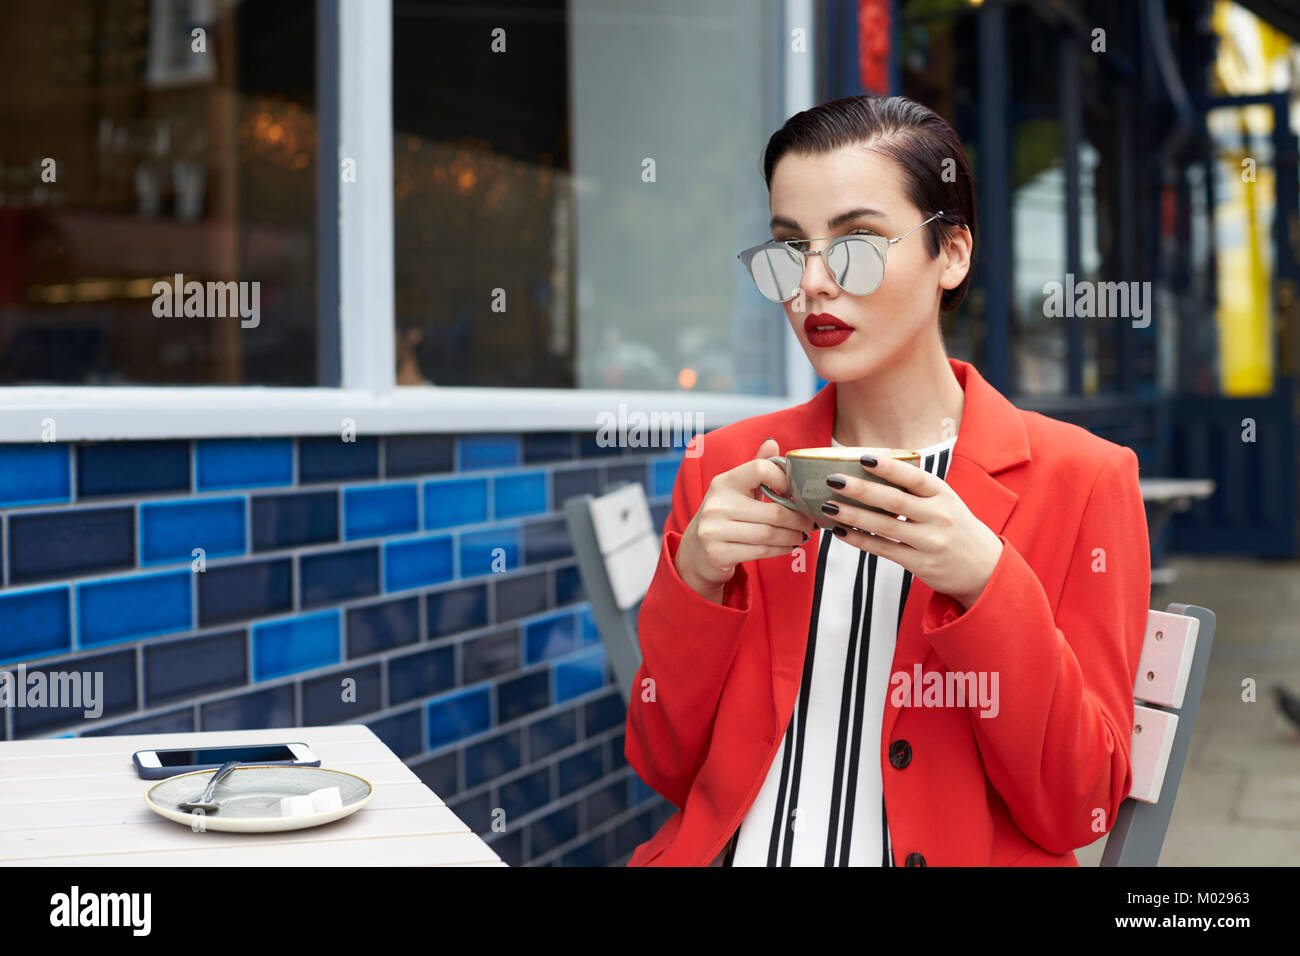 Woman in red jacket sitting outside a cafe, waist up Stock Photo